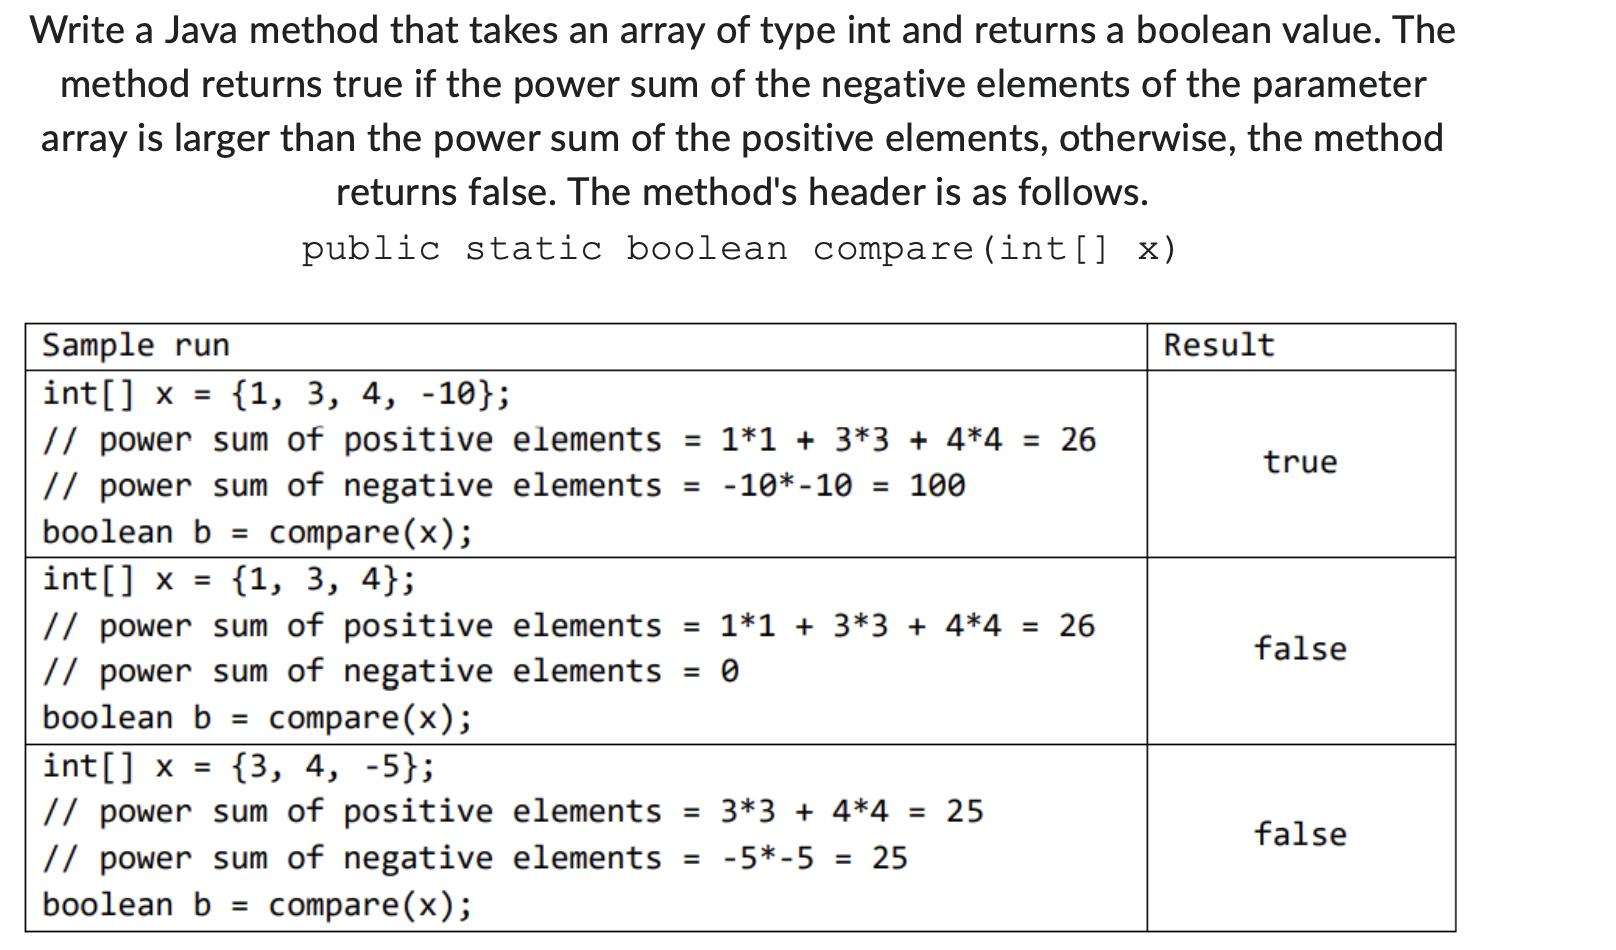 Write a Java method that takes an array of type int and returns a boolean value. The method returns true if